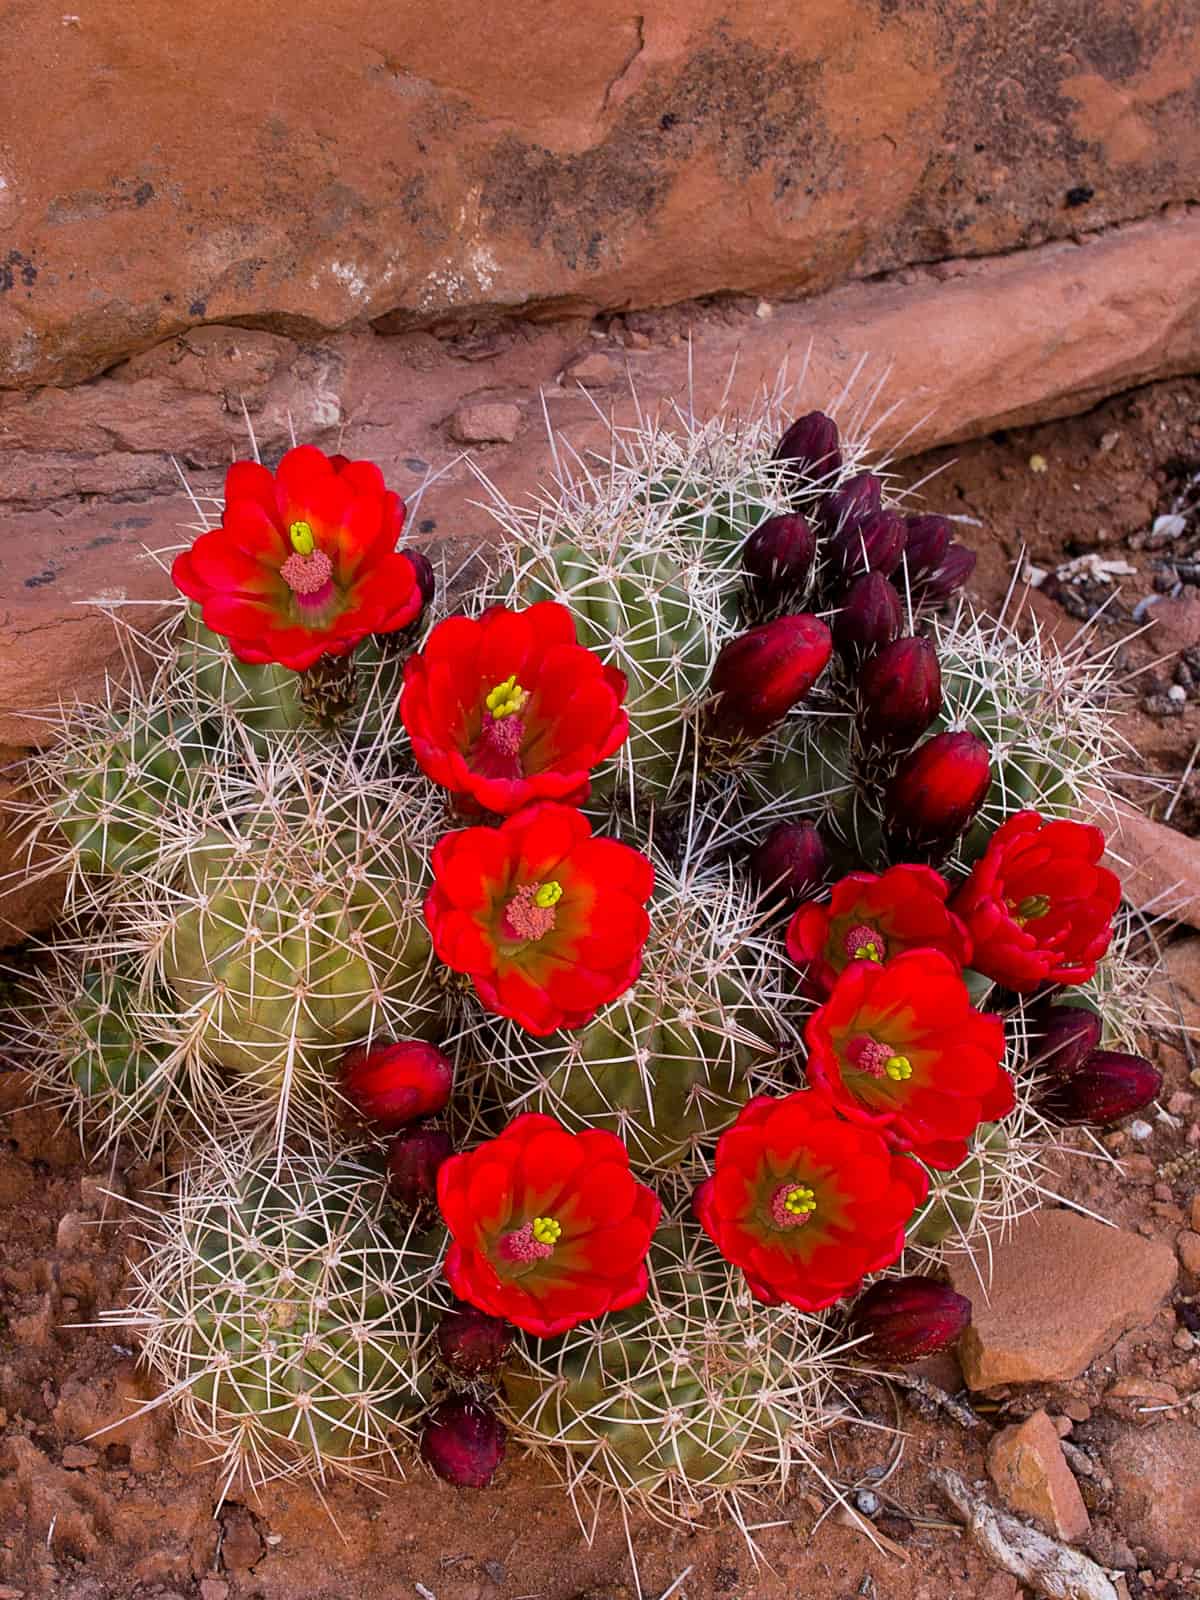 Blooming red Kingcup Cactus growing on the side of a rock